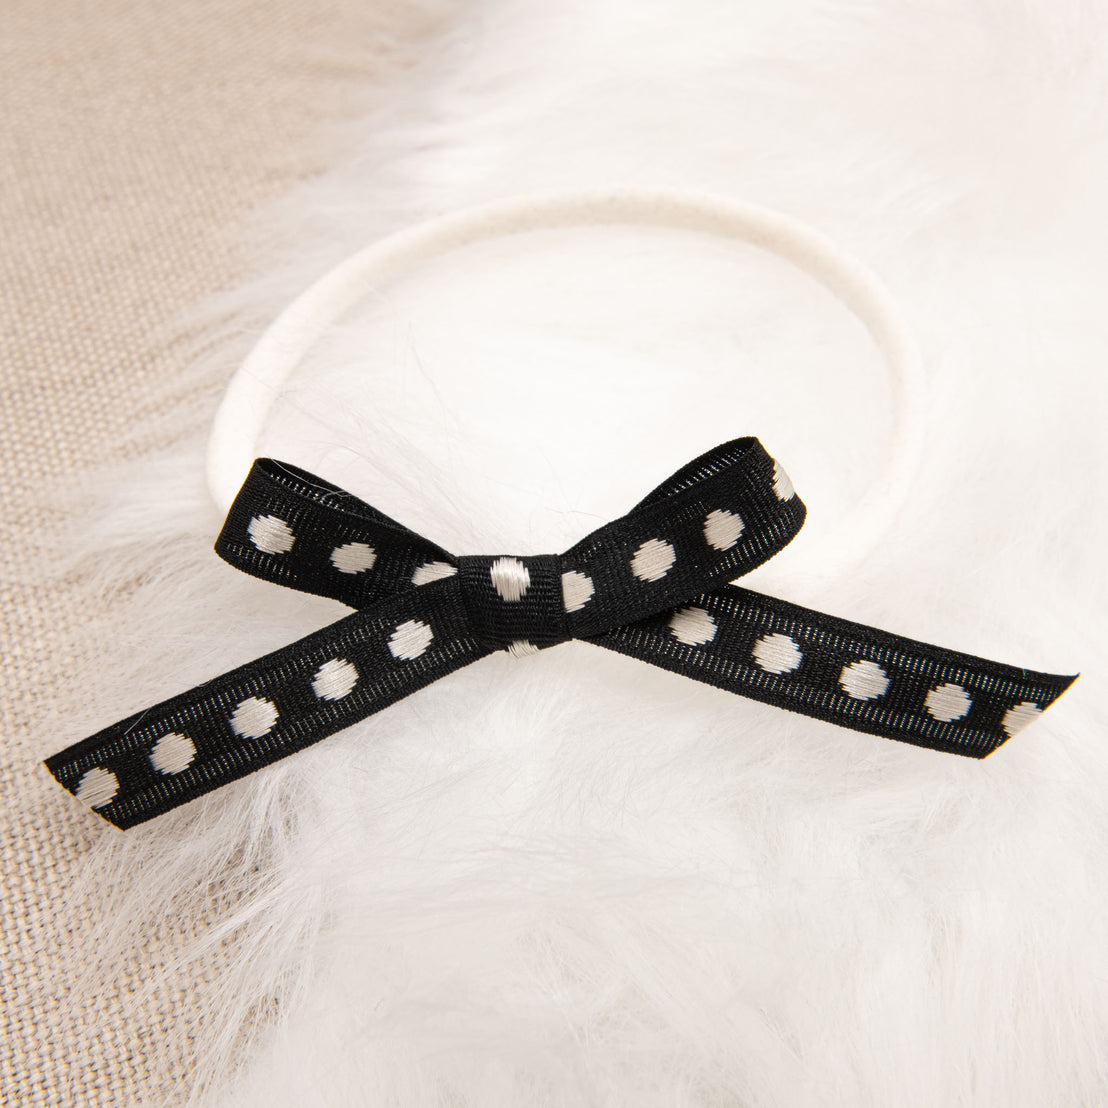 A black embroidered June Bow Headband with white polka dots tied into a bow on a white furry surface.